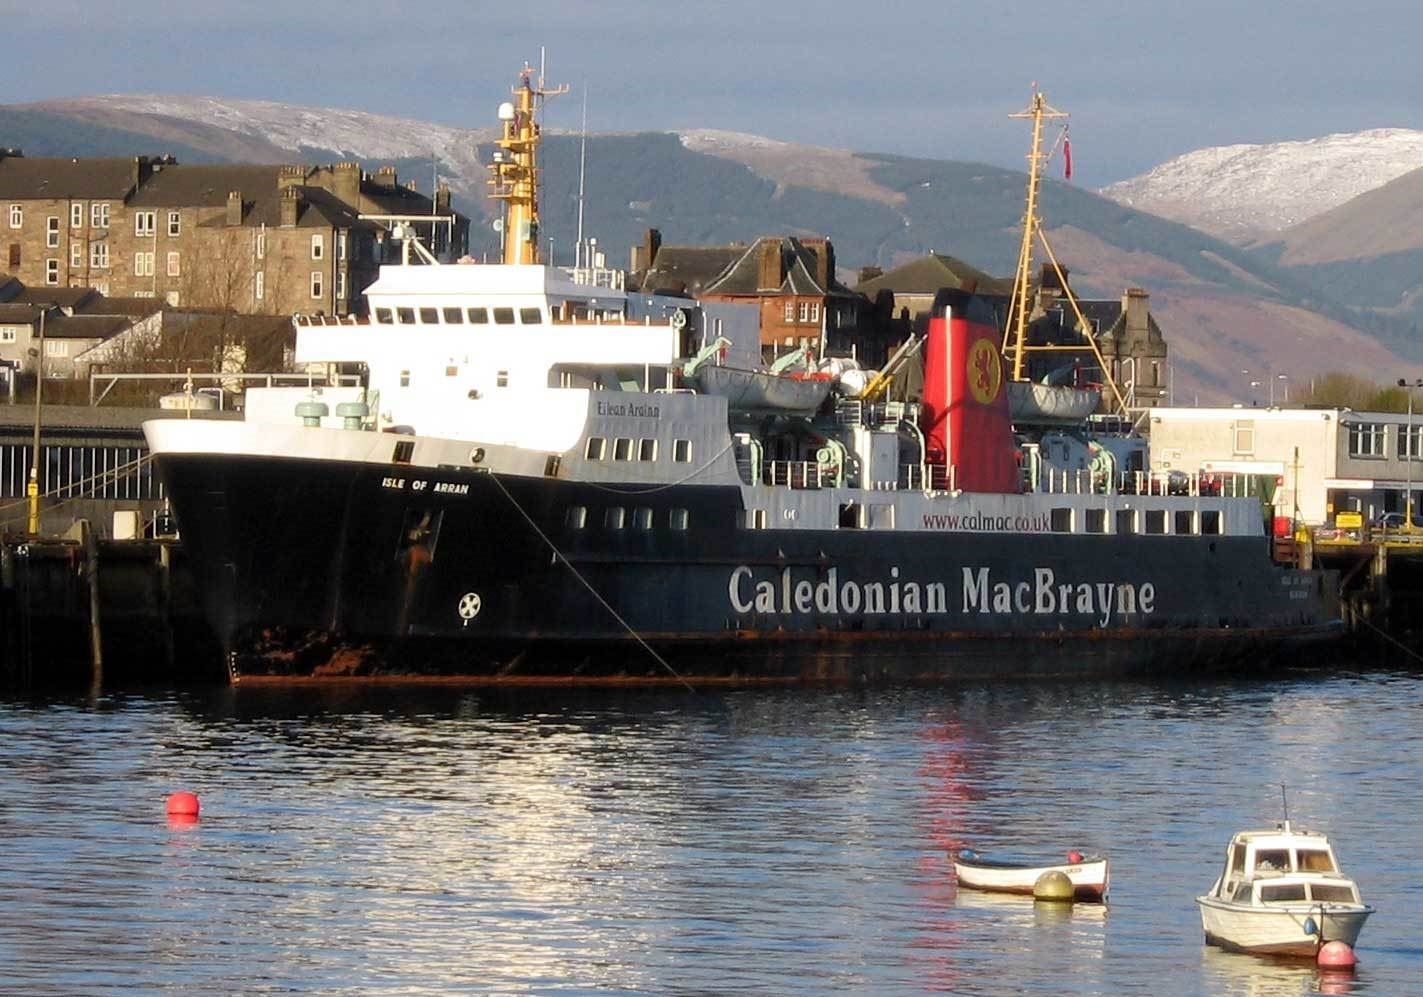 The MV Isle of Arran. Picture: Dave Souza, CC BY-SA 4.0 <https://creativecommons.org/licenses/by-sa/4.0>, via Wikimedia Commons.